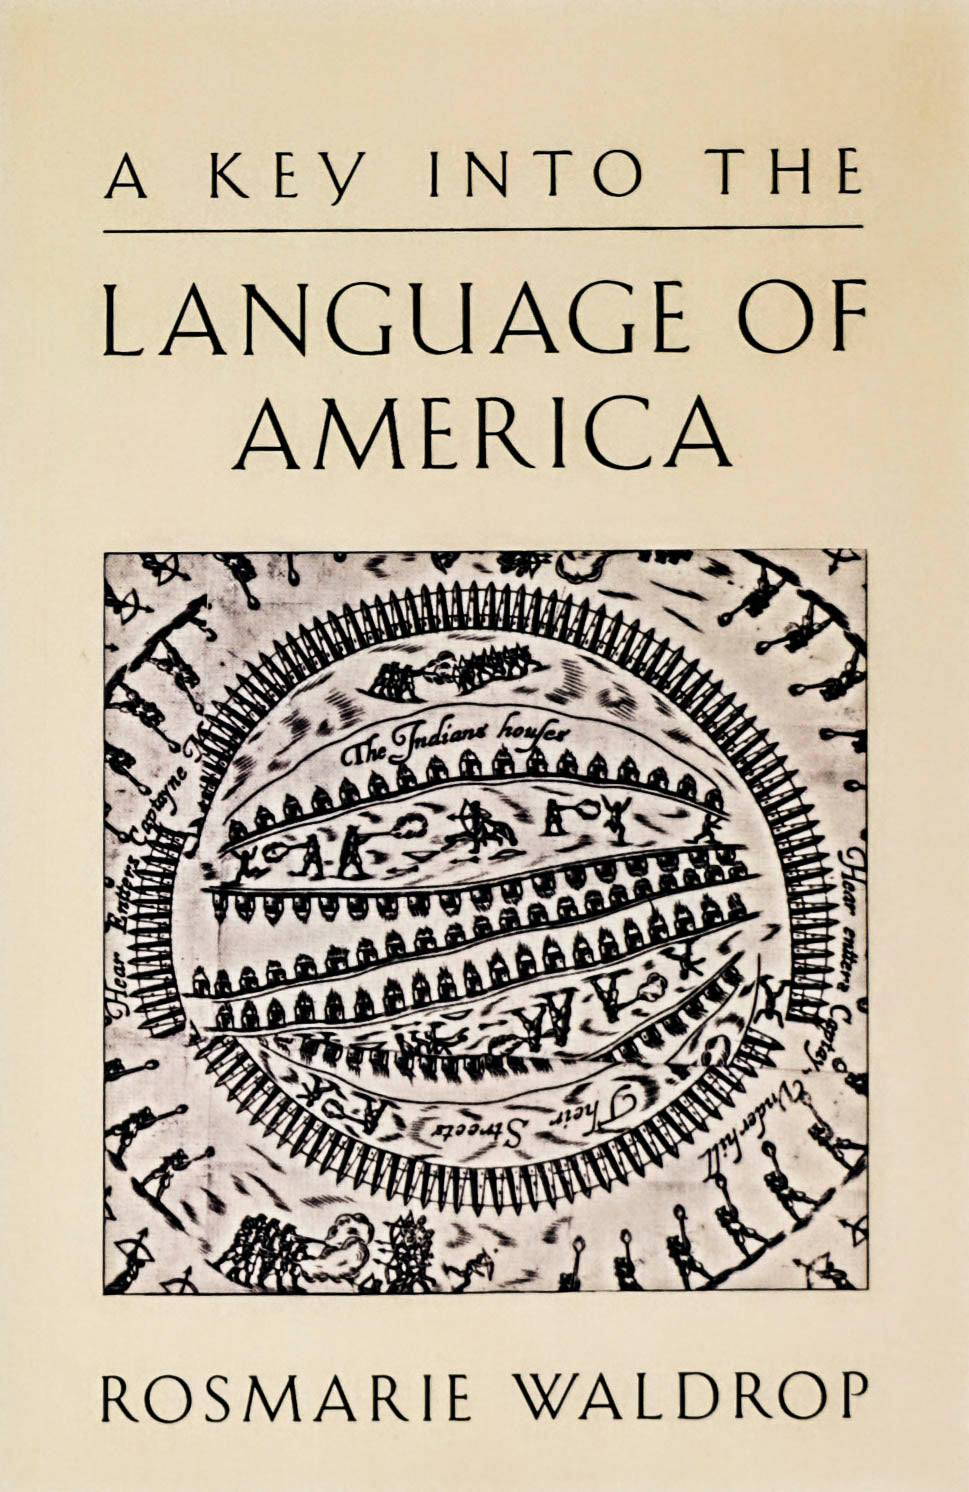 Tan book cover. At the top the title is written in all caps: A KEY INTO THE LANGUAGE OF AMERICA. At the bottom, the author's name: ROSMARIE WALDROP. There is an antique-looking extract from a map in the approximate center of the cover.